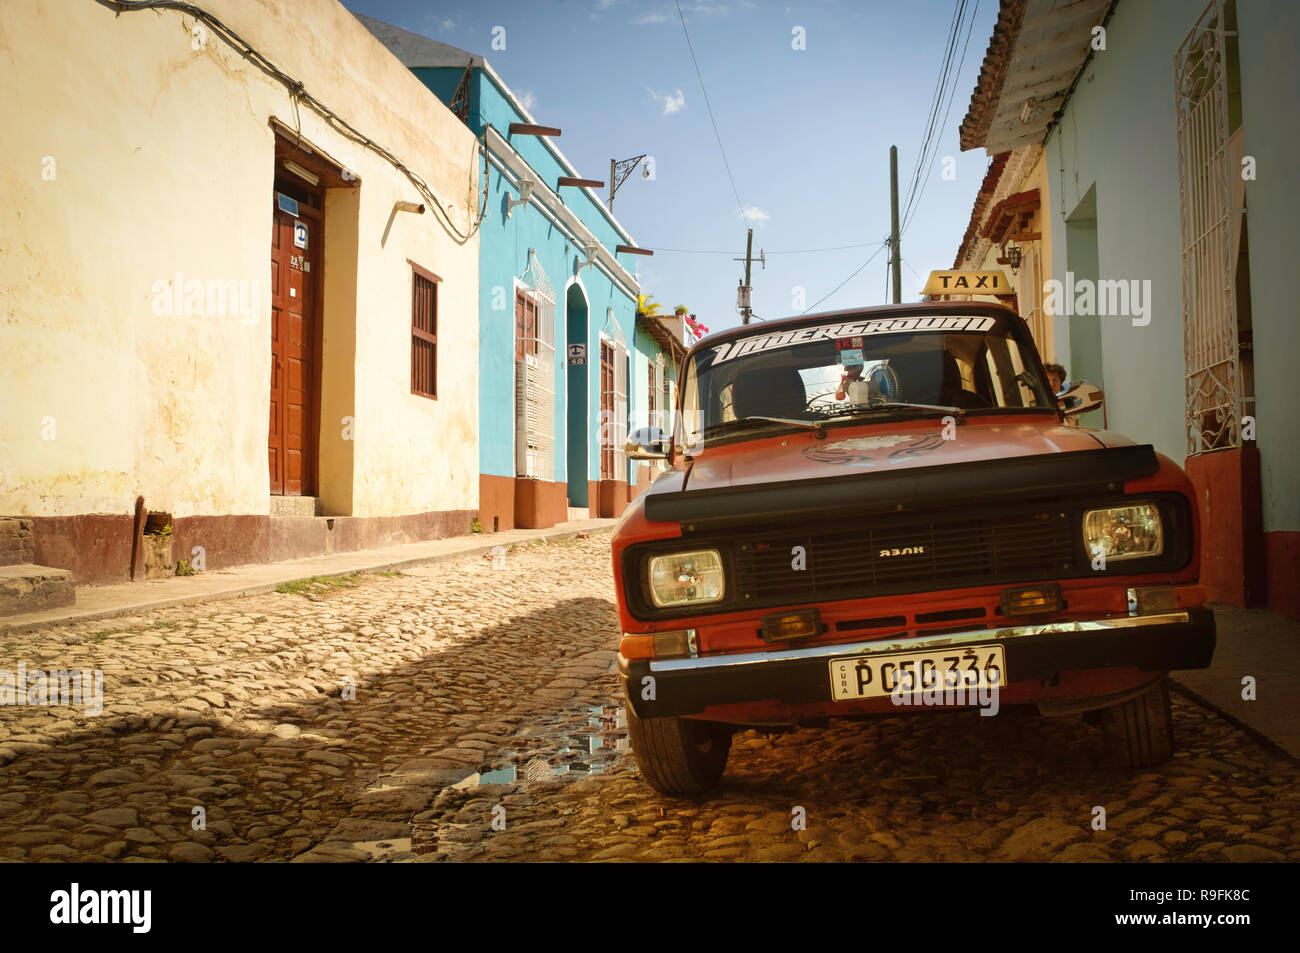 A classic vintage Russian red Lada (taxi) parked on the cobbled streets of Trinidad, Cuba. Stock Photo